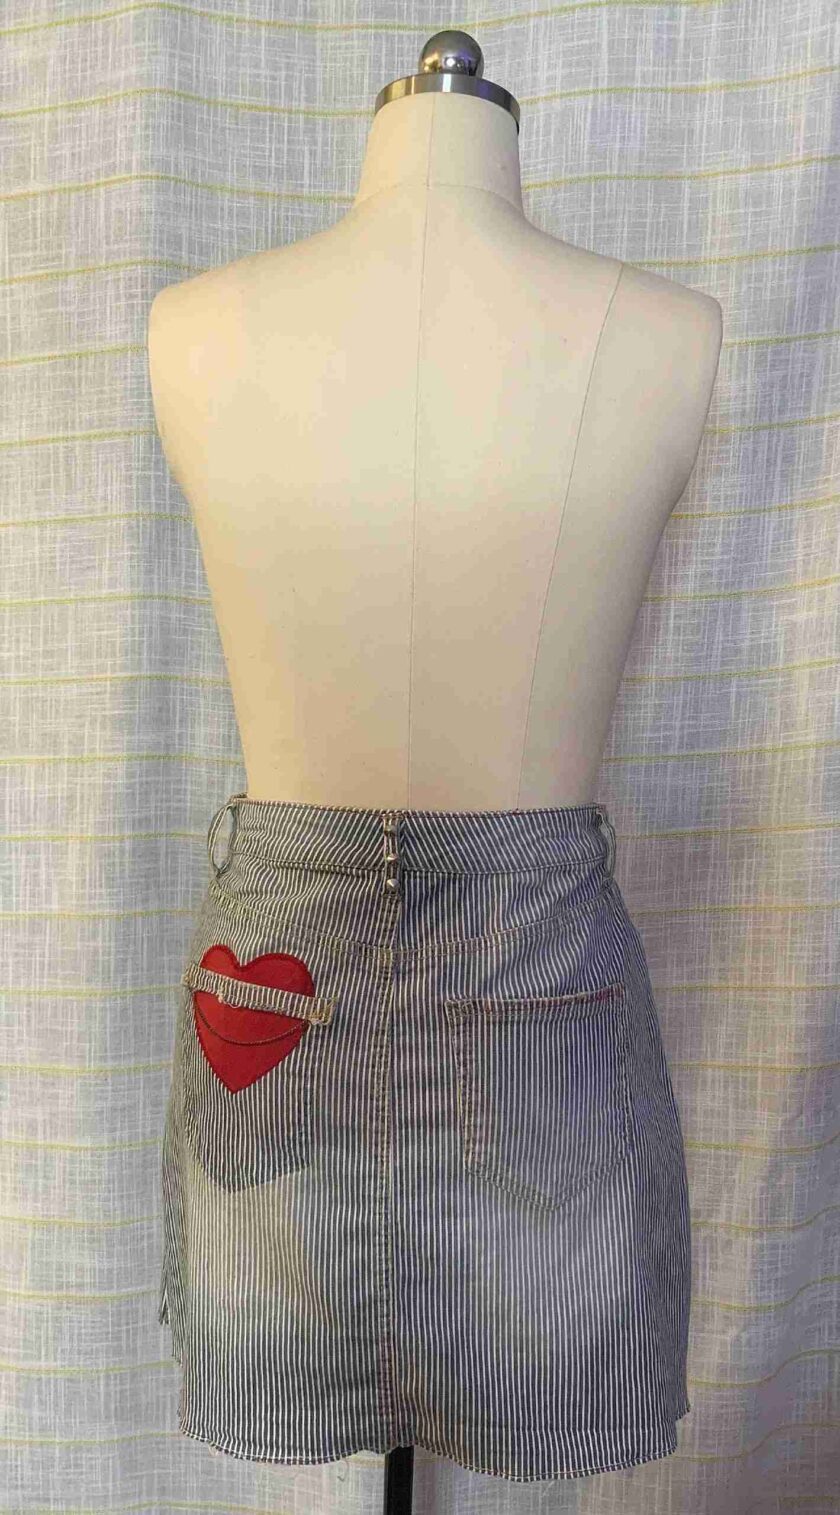 a mannequin wearing a skirt with red lips on it.